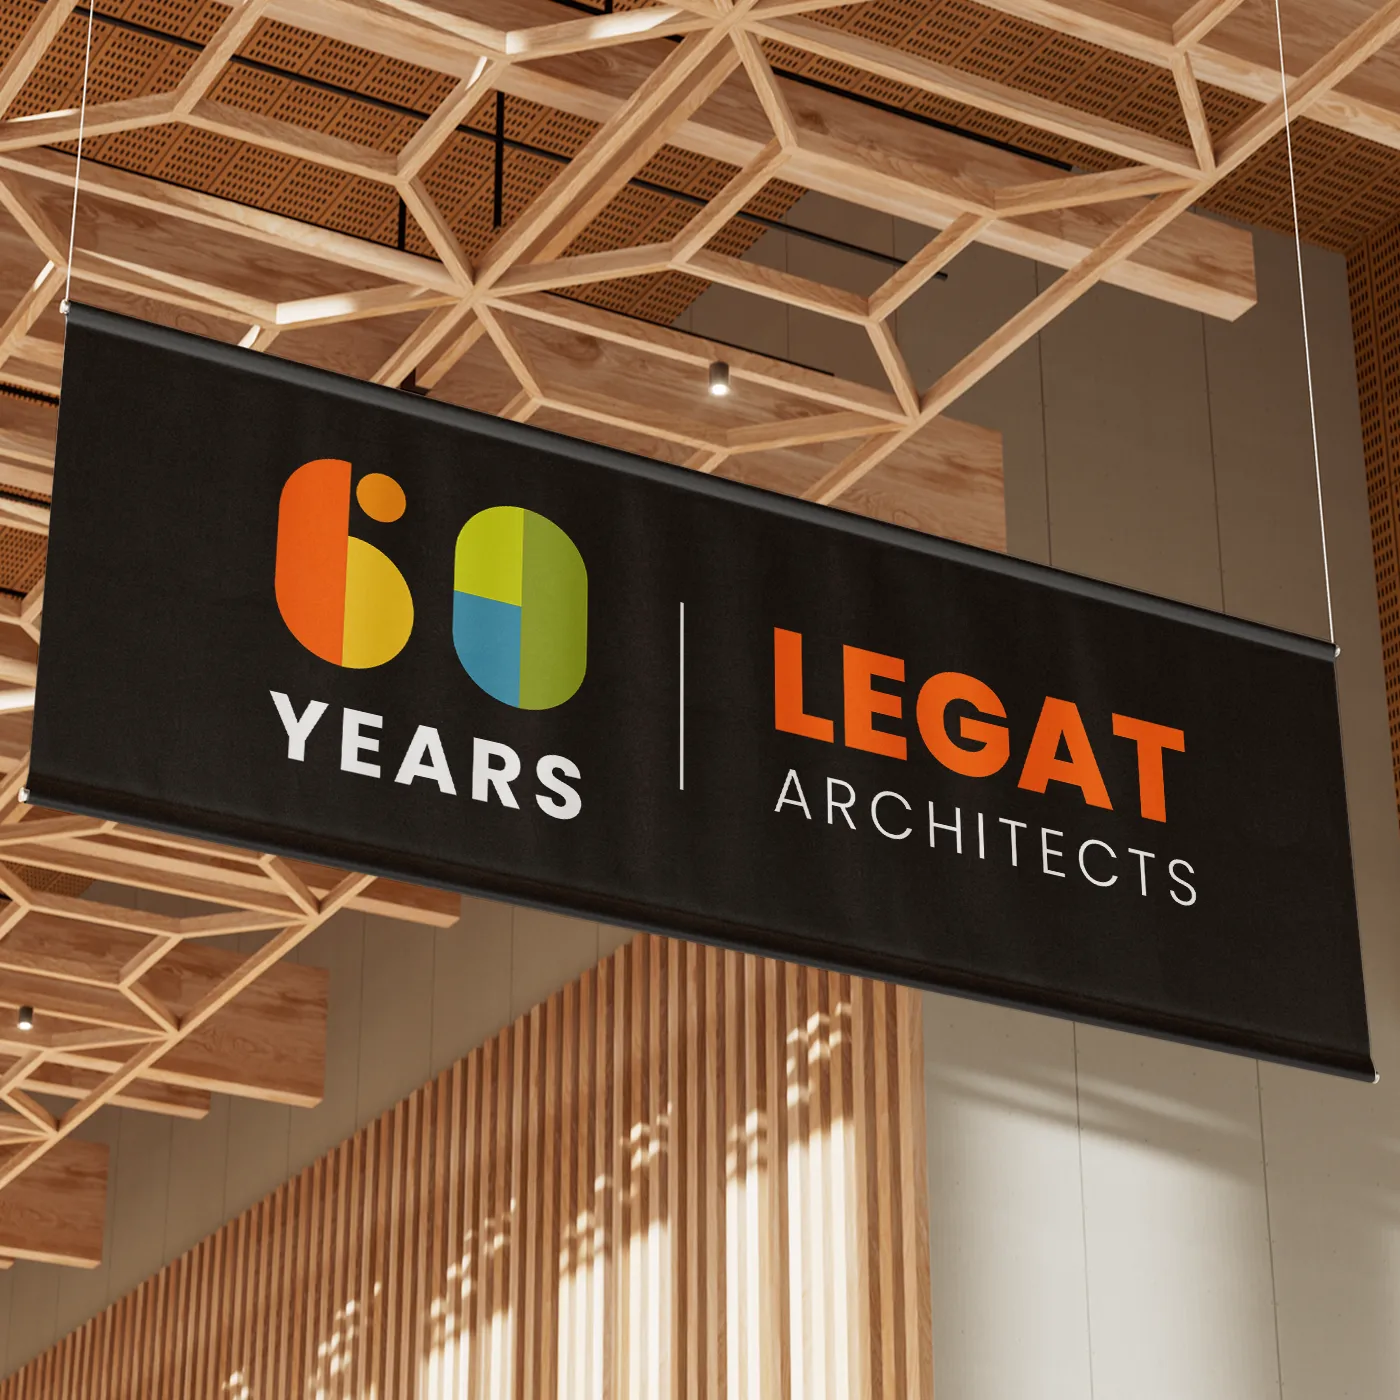 Anniversary logo design for an architects firm celebrating 60 years displayed on a banner.